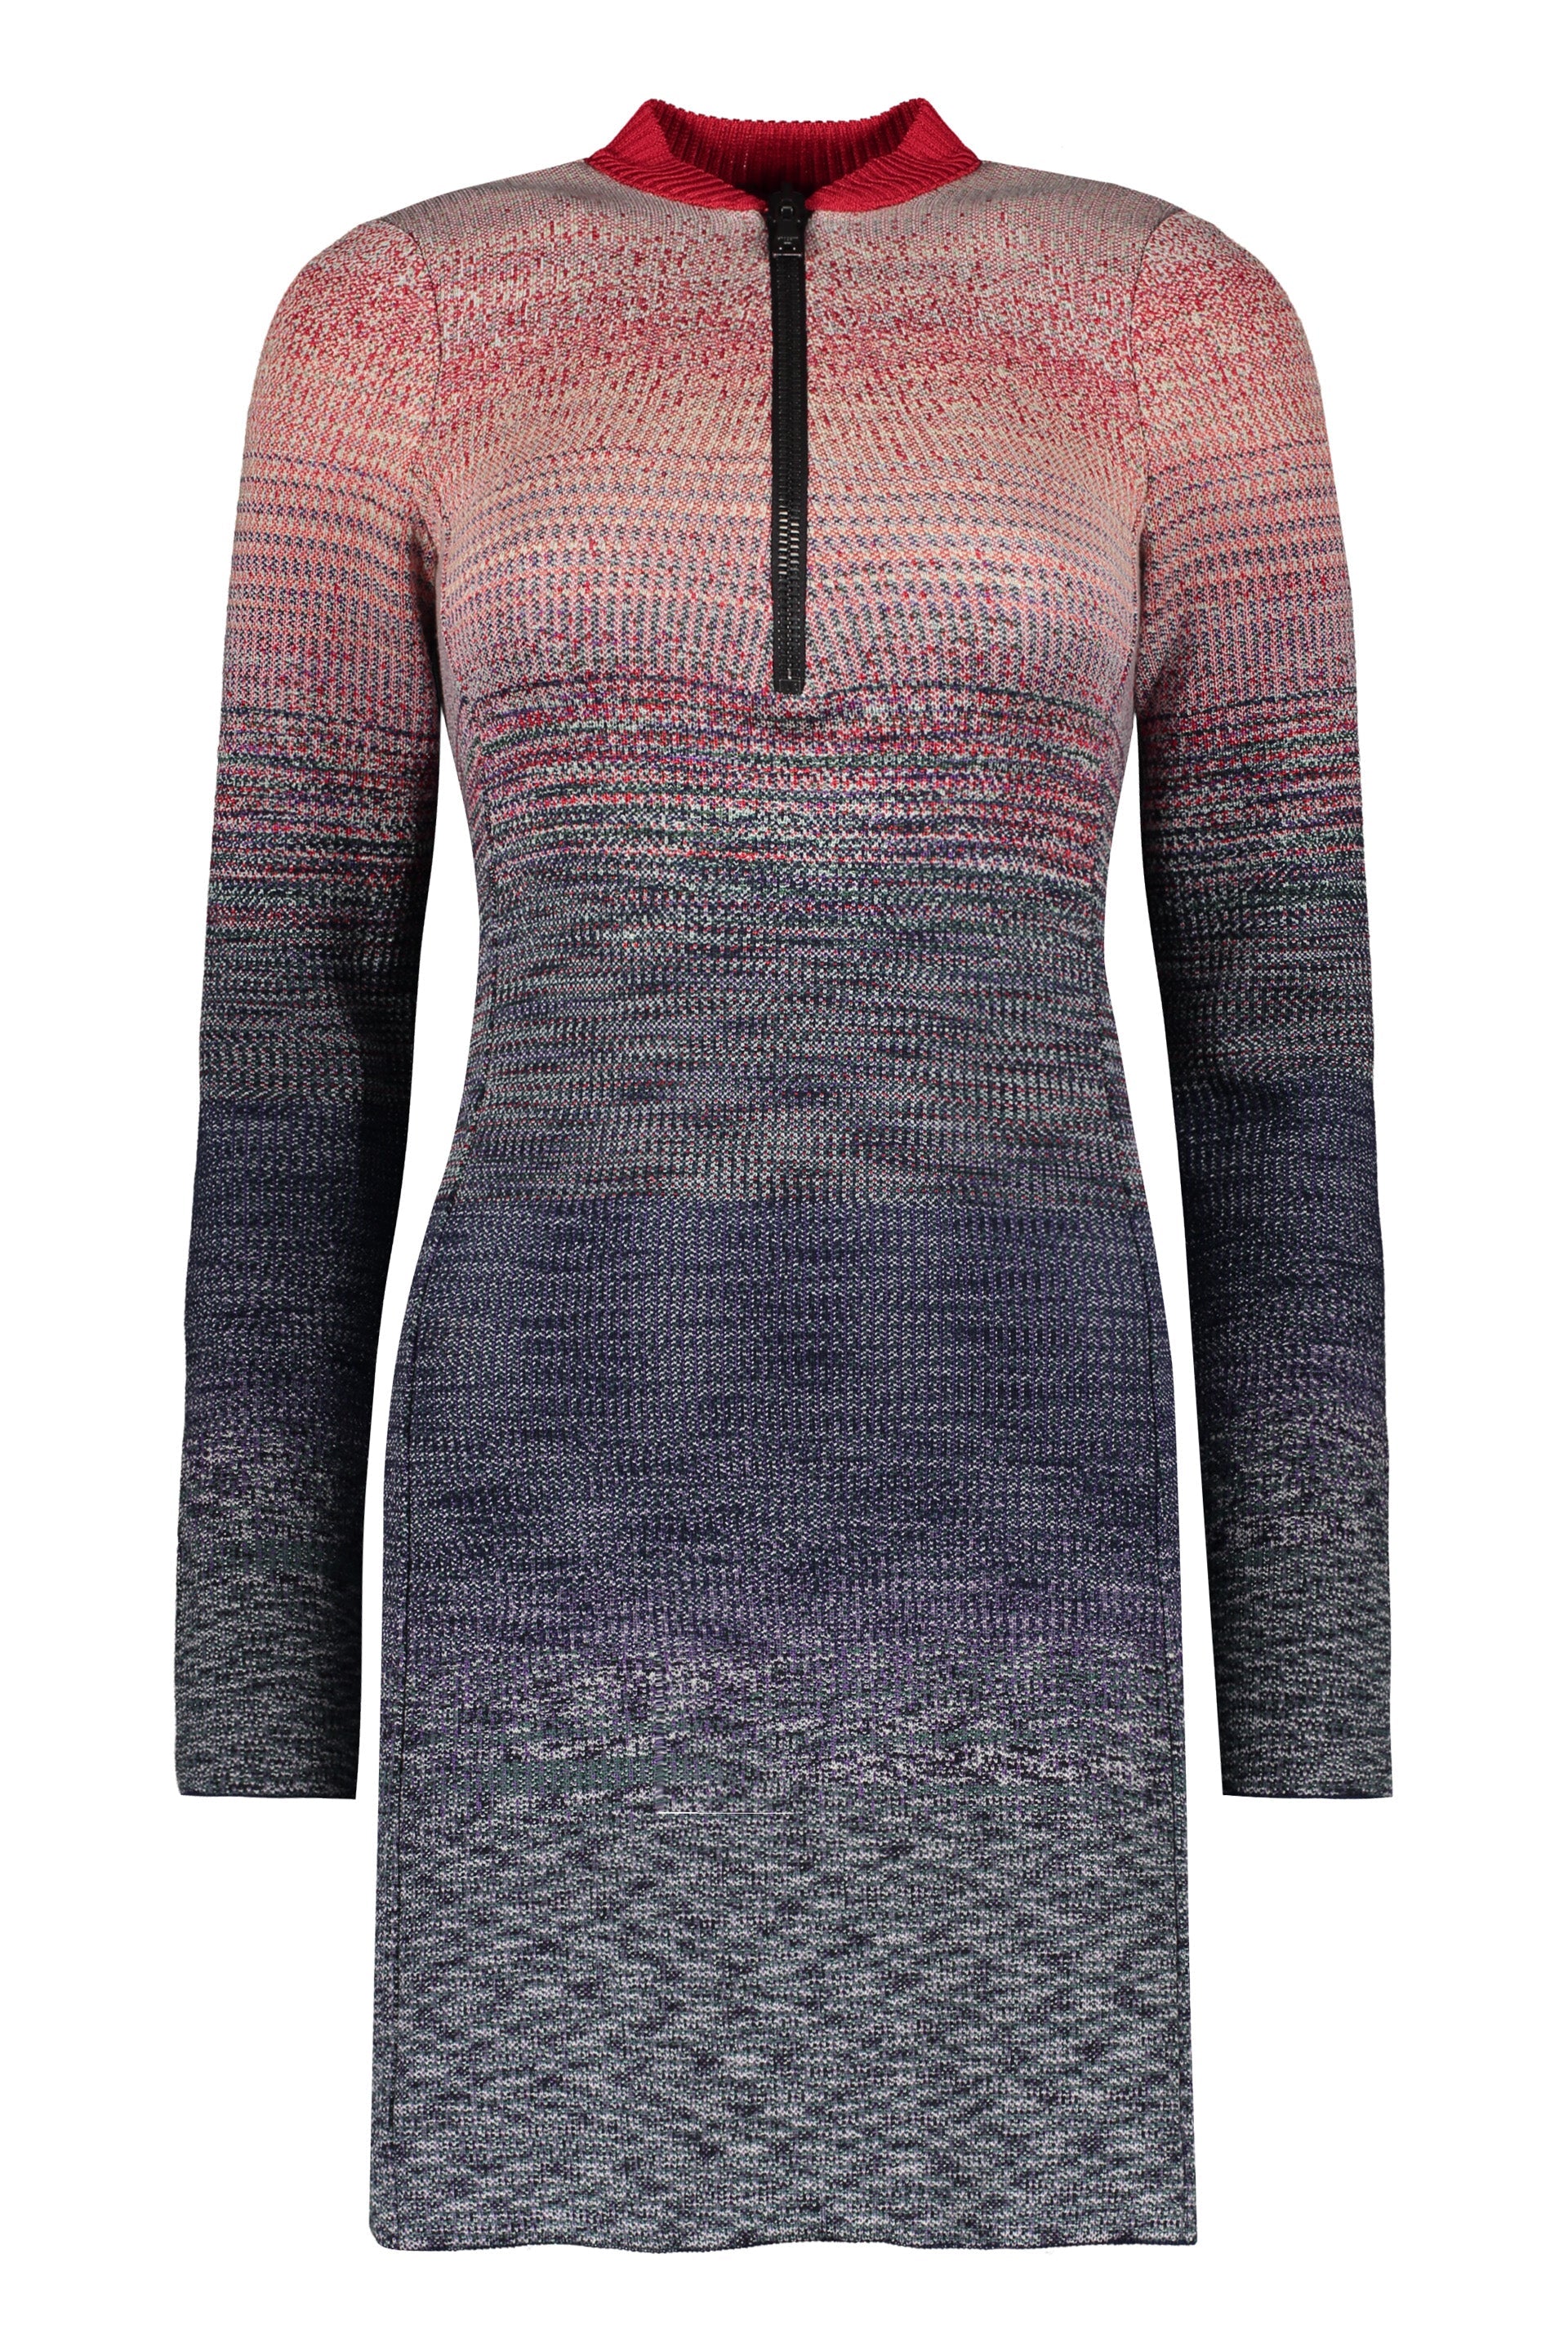 Missoni-OUTLET-SALE-Knitted-dress-Kleider-Rocke-40-ARCHIVE-COLLECTION_f0608804-7694-453b-8c25-59e50f8fd297.jpg